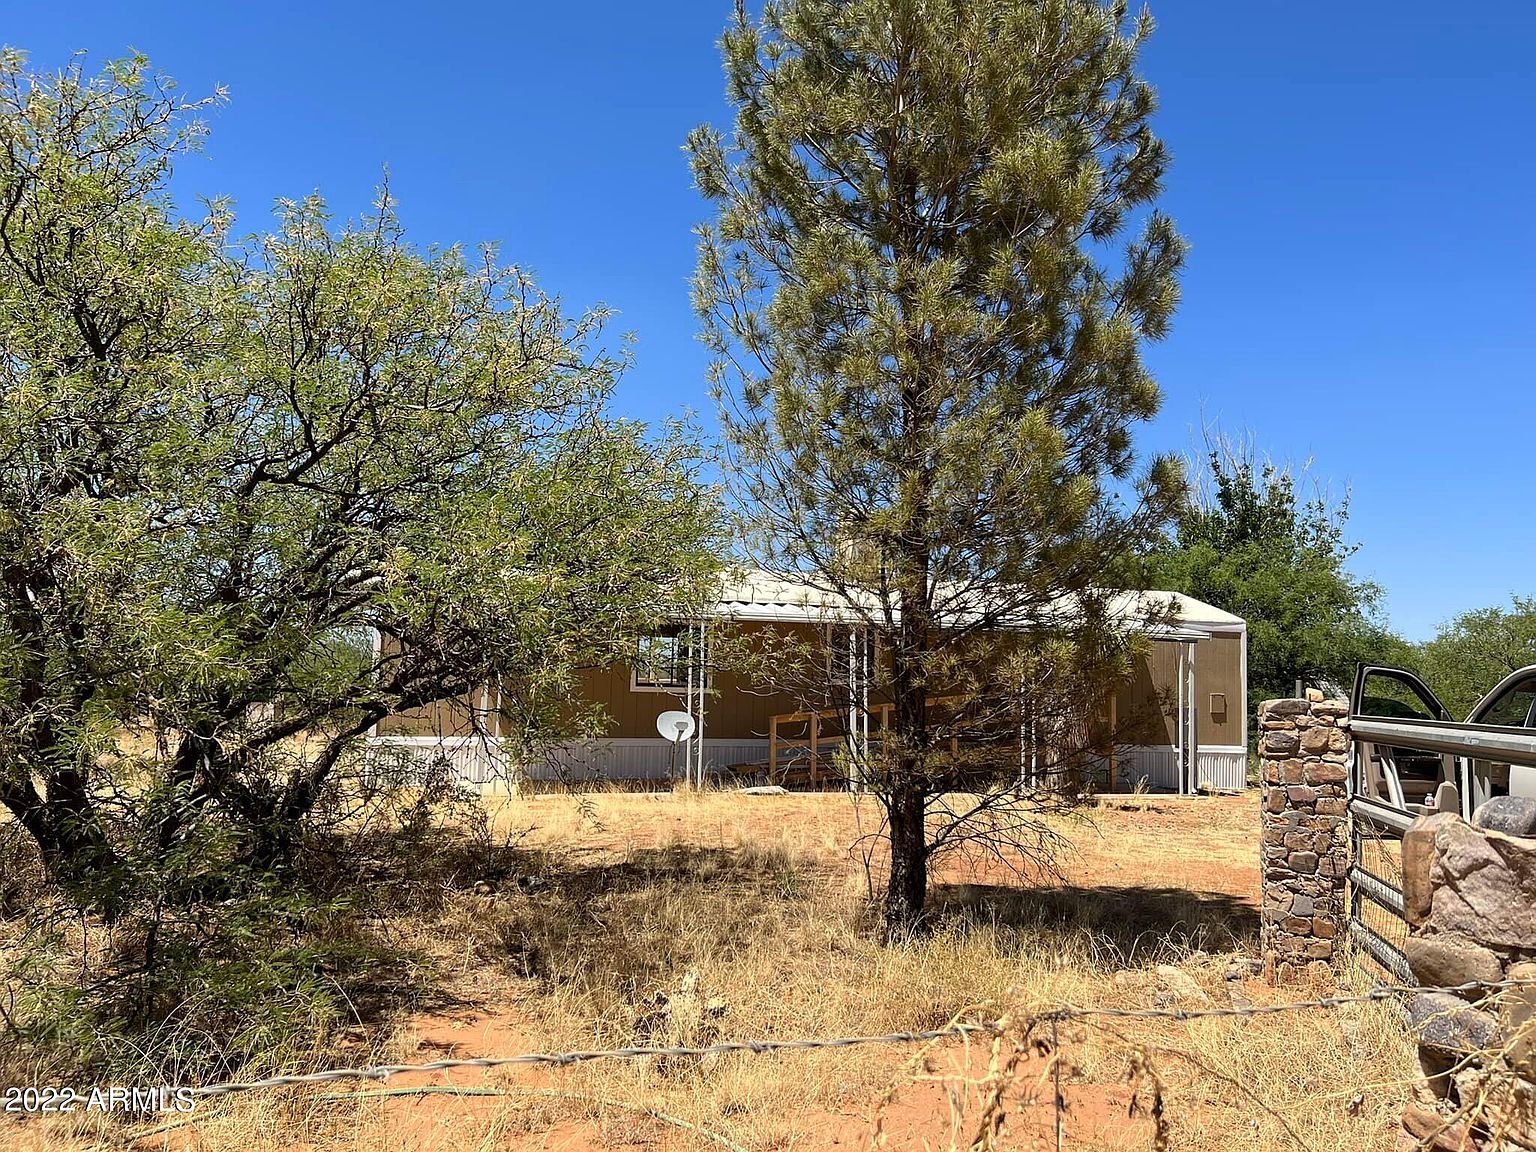 6151 S Ridling Dr, Hereford, AZ 85615 | Zillow